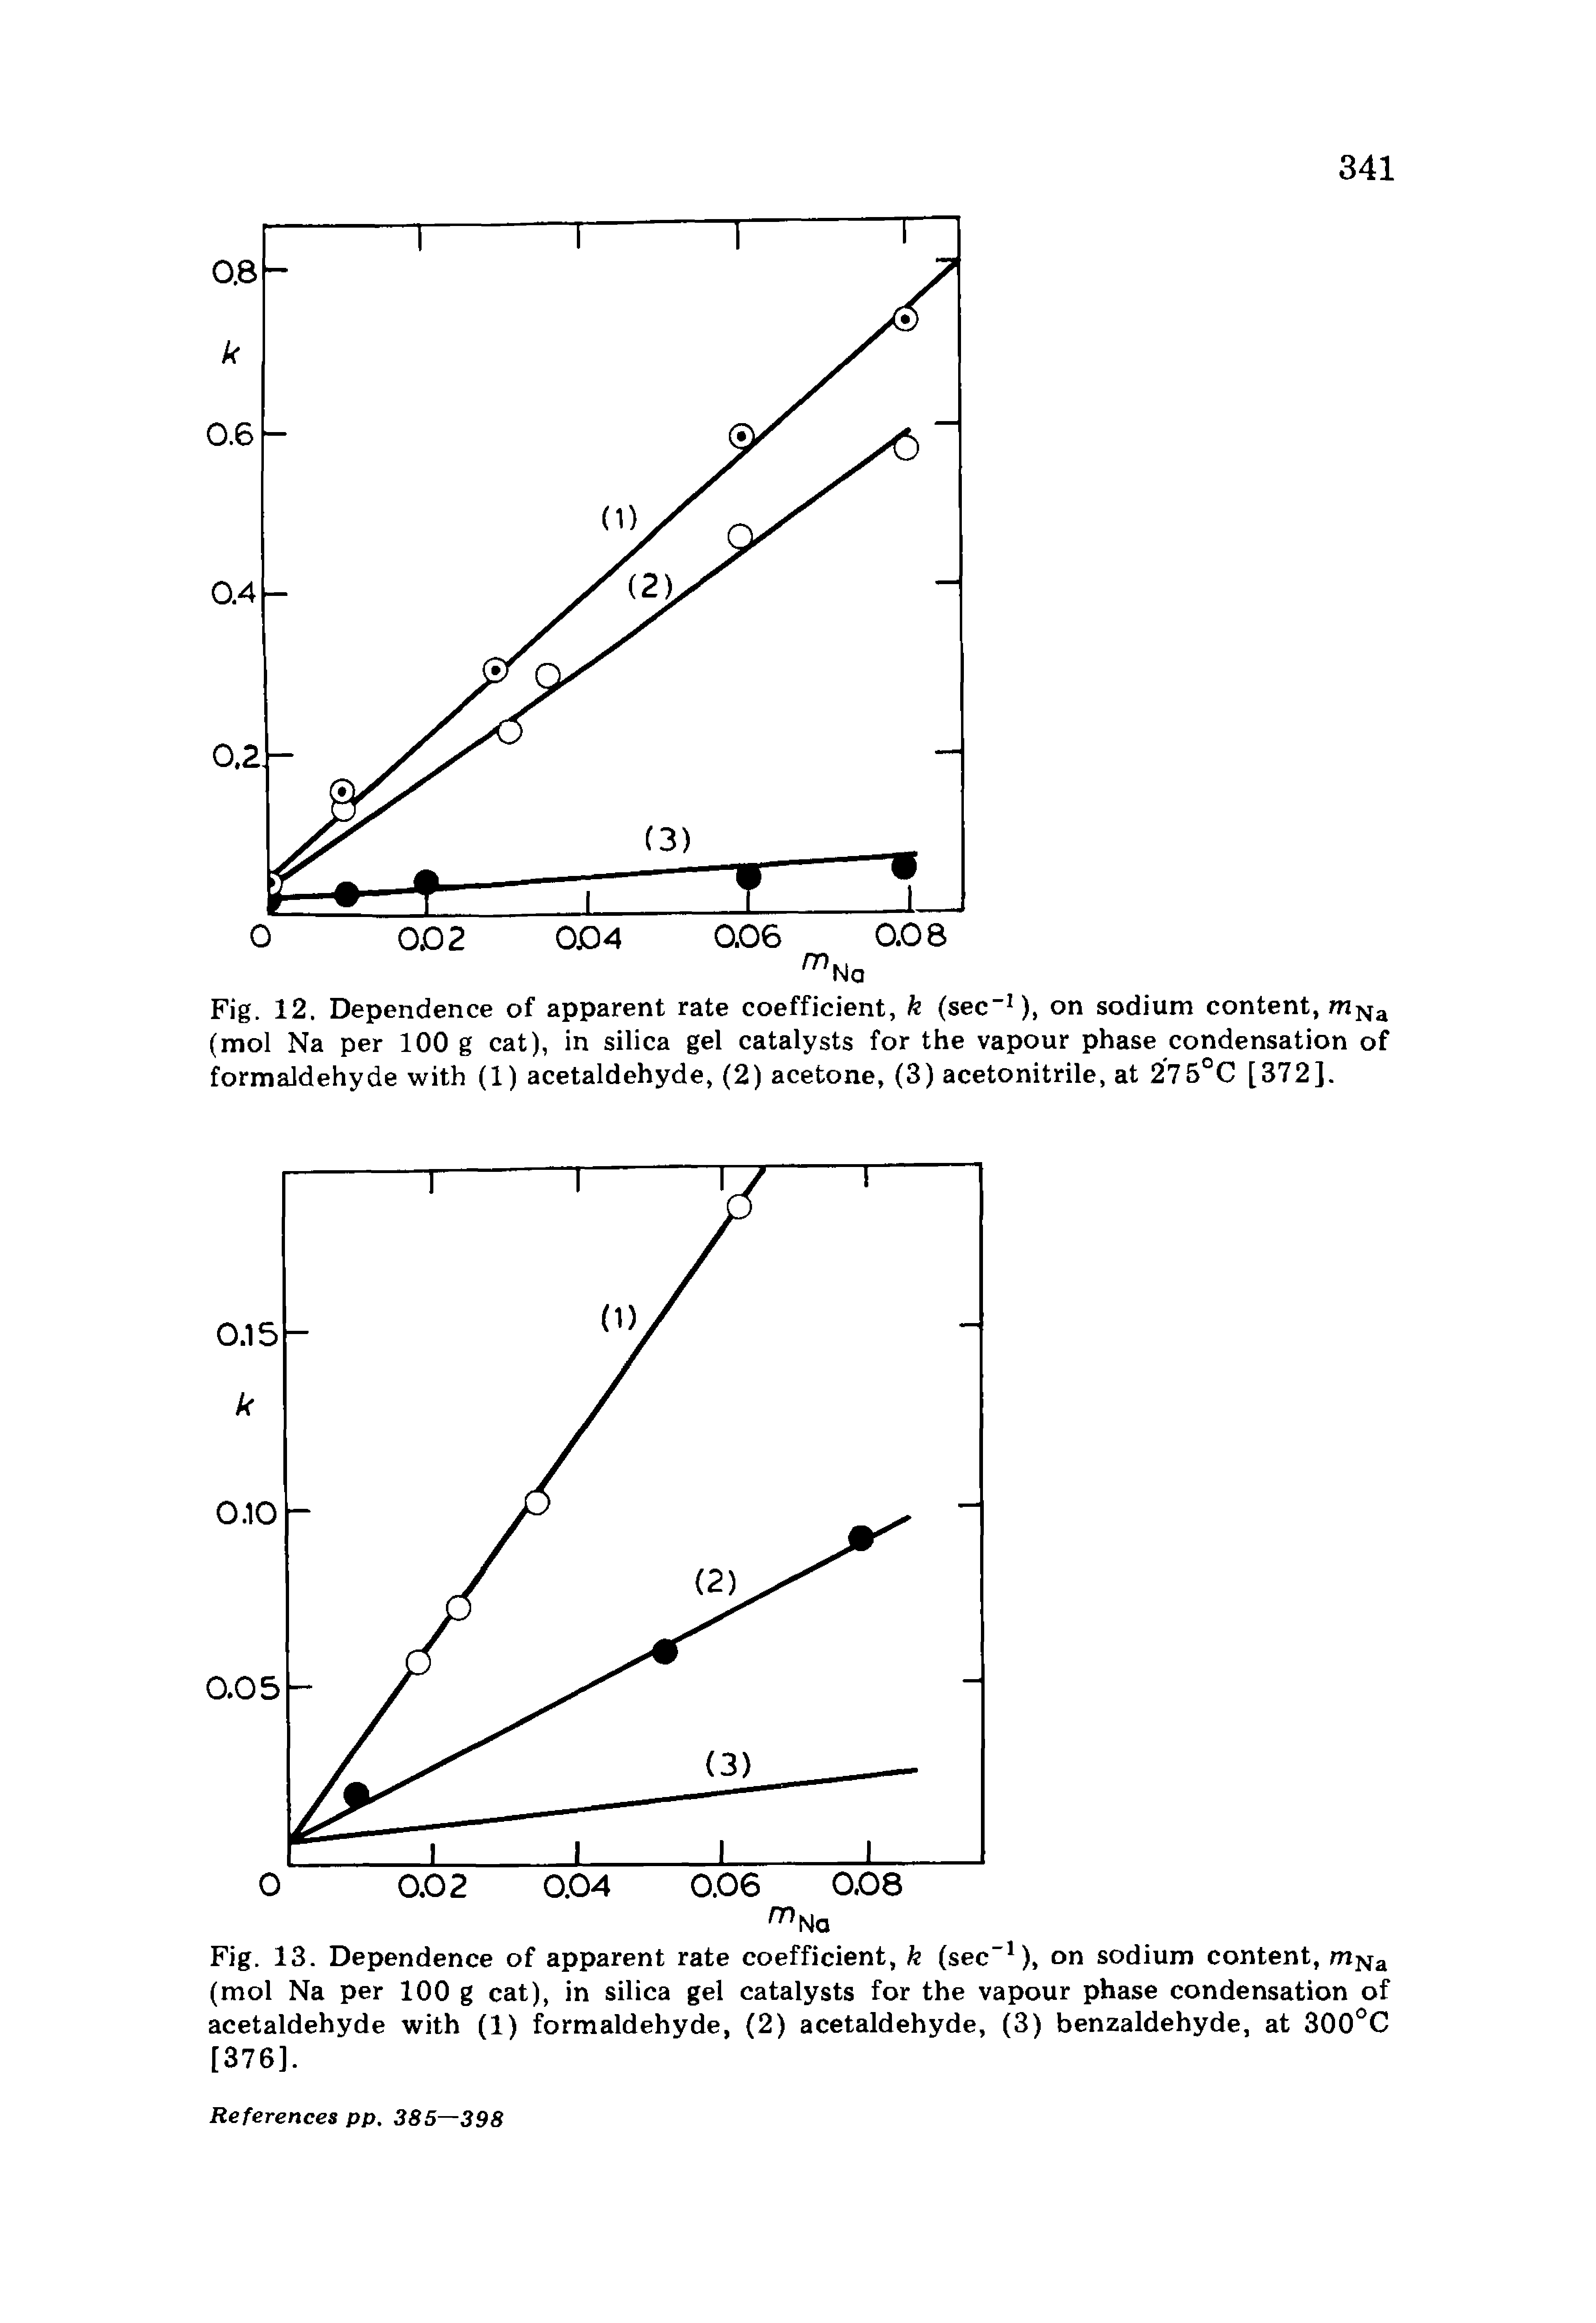 Fig. 12. Dependence of apparent rate coefficient, k (sec-1), on sodium content, mNa (mol Na per 100 g cat), in silica gel catalysts for the vapour phase condensation of formaldehyde with (1) acetaldehyde, (2) acetone, (3) acetonitrile, at 275°C [372].